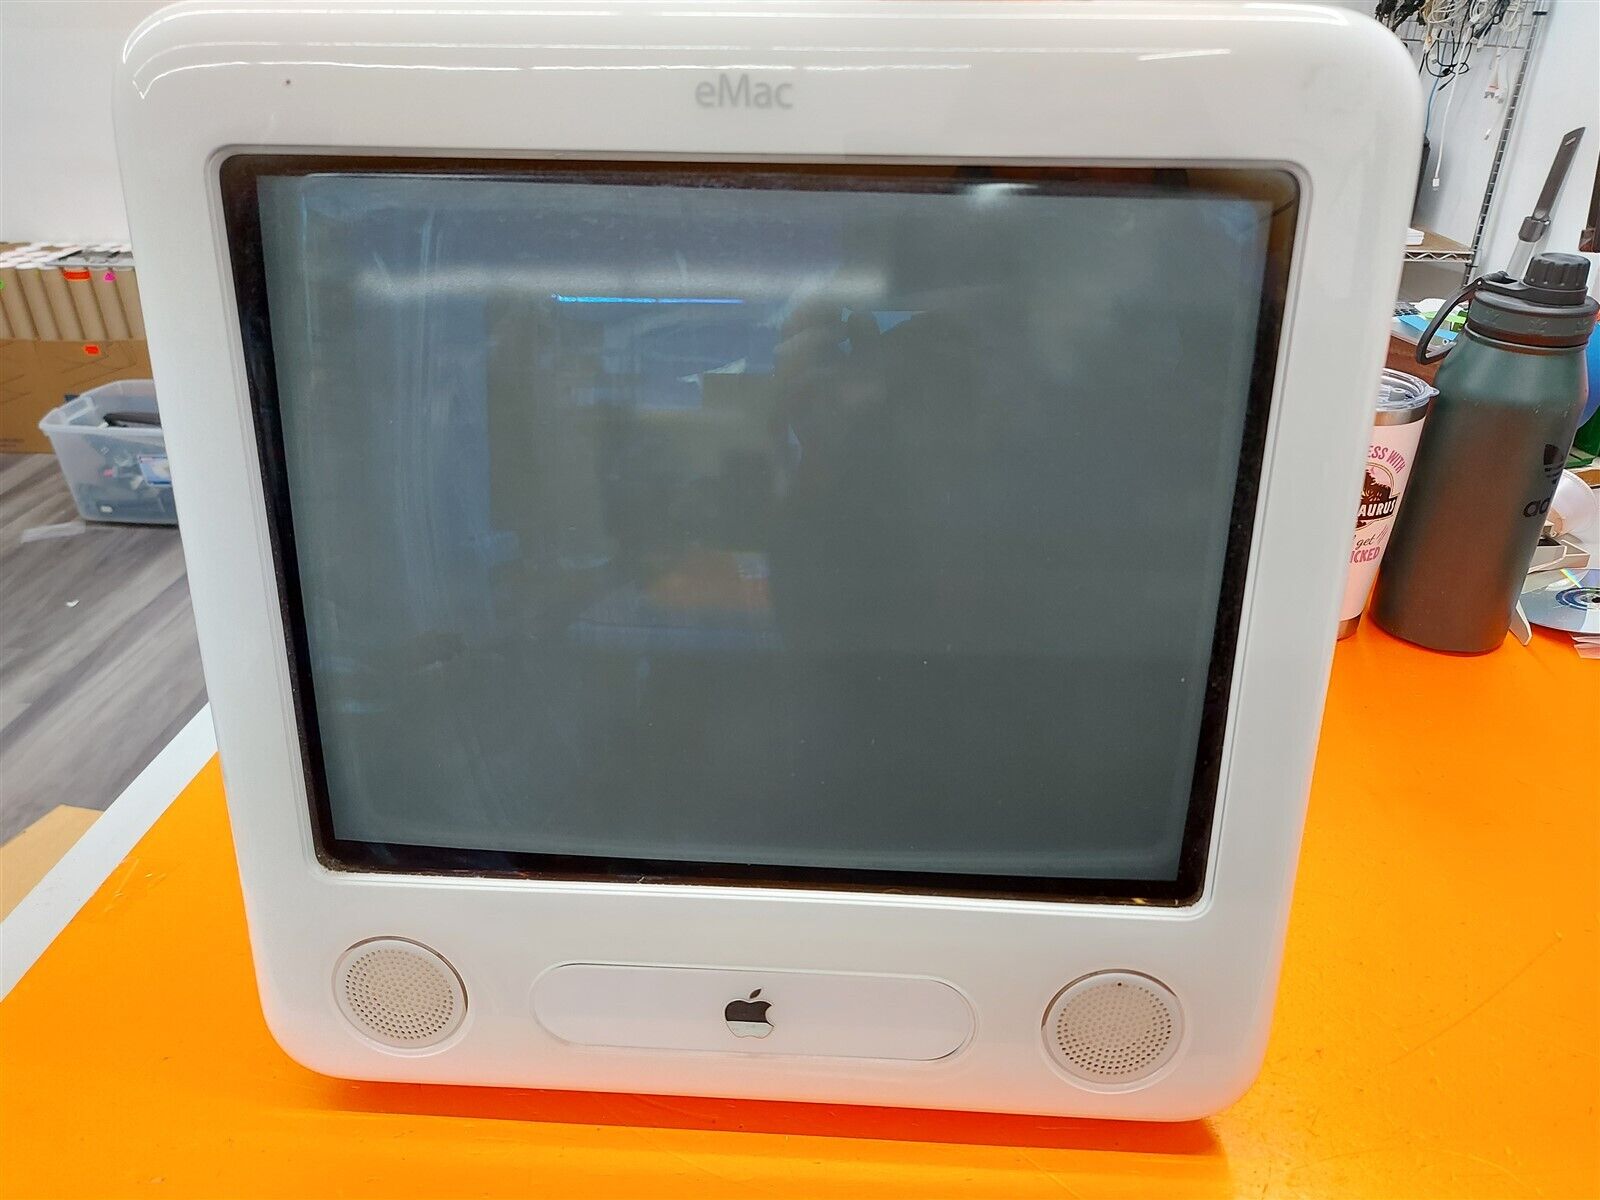 ⭐⭐⭐⭐⭐ Vintage Apple eMac A1002 All in One Desktop Power PC Computer